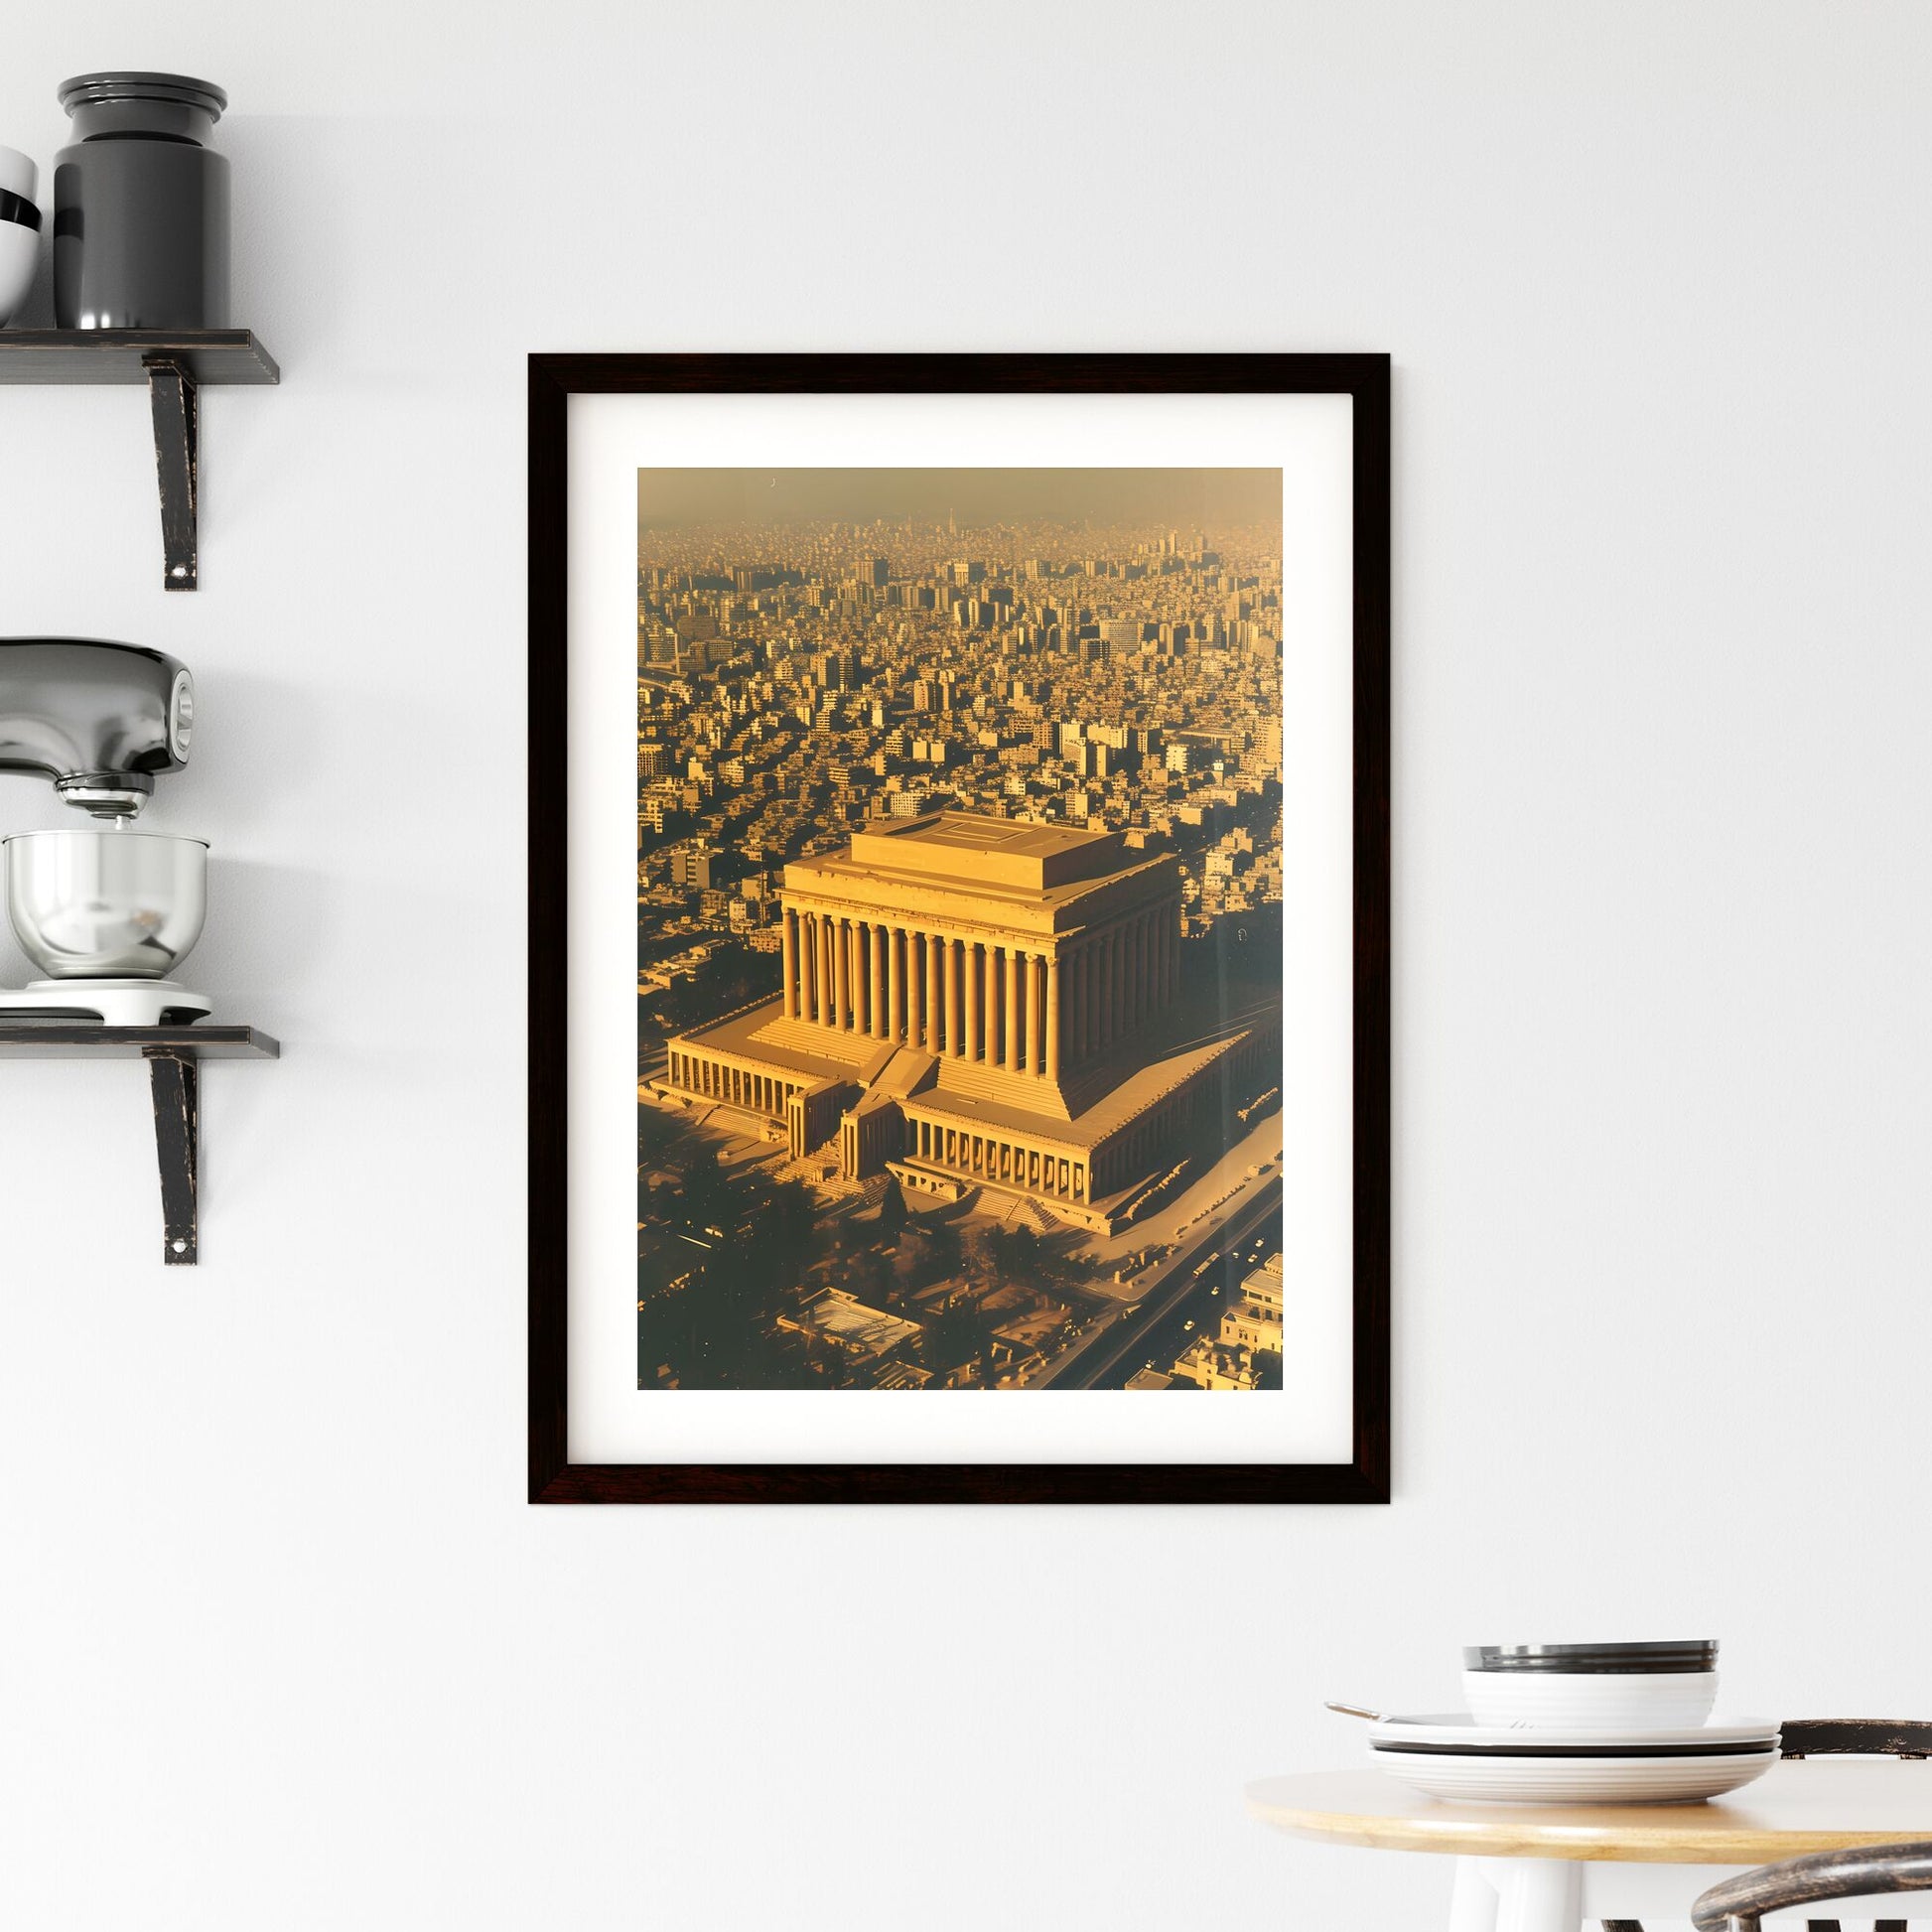 In ancient babylon, there a very wide temple structure in the middle of the walled city - Art print of a large building with columns and a large city Default Title